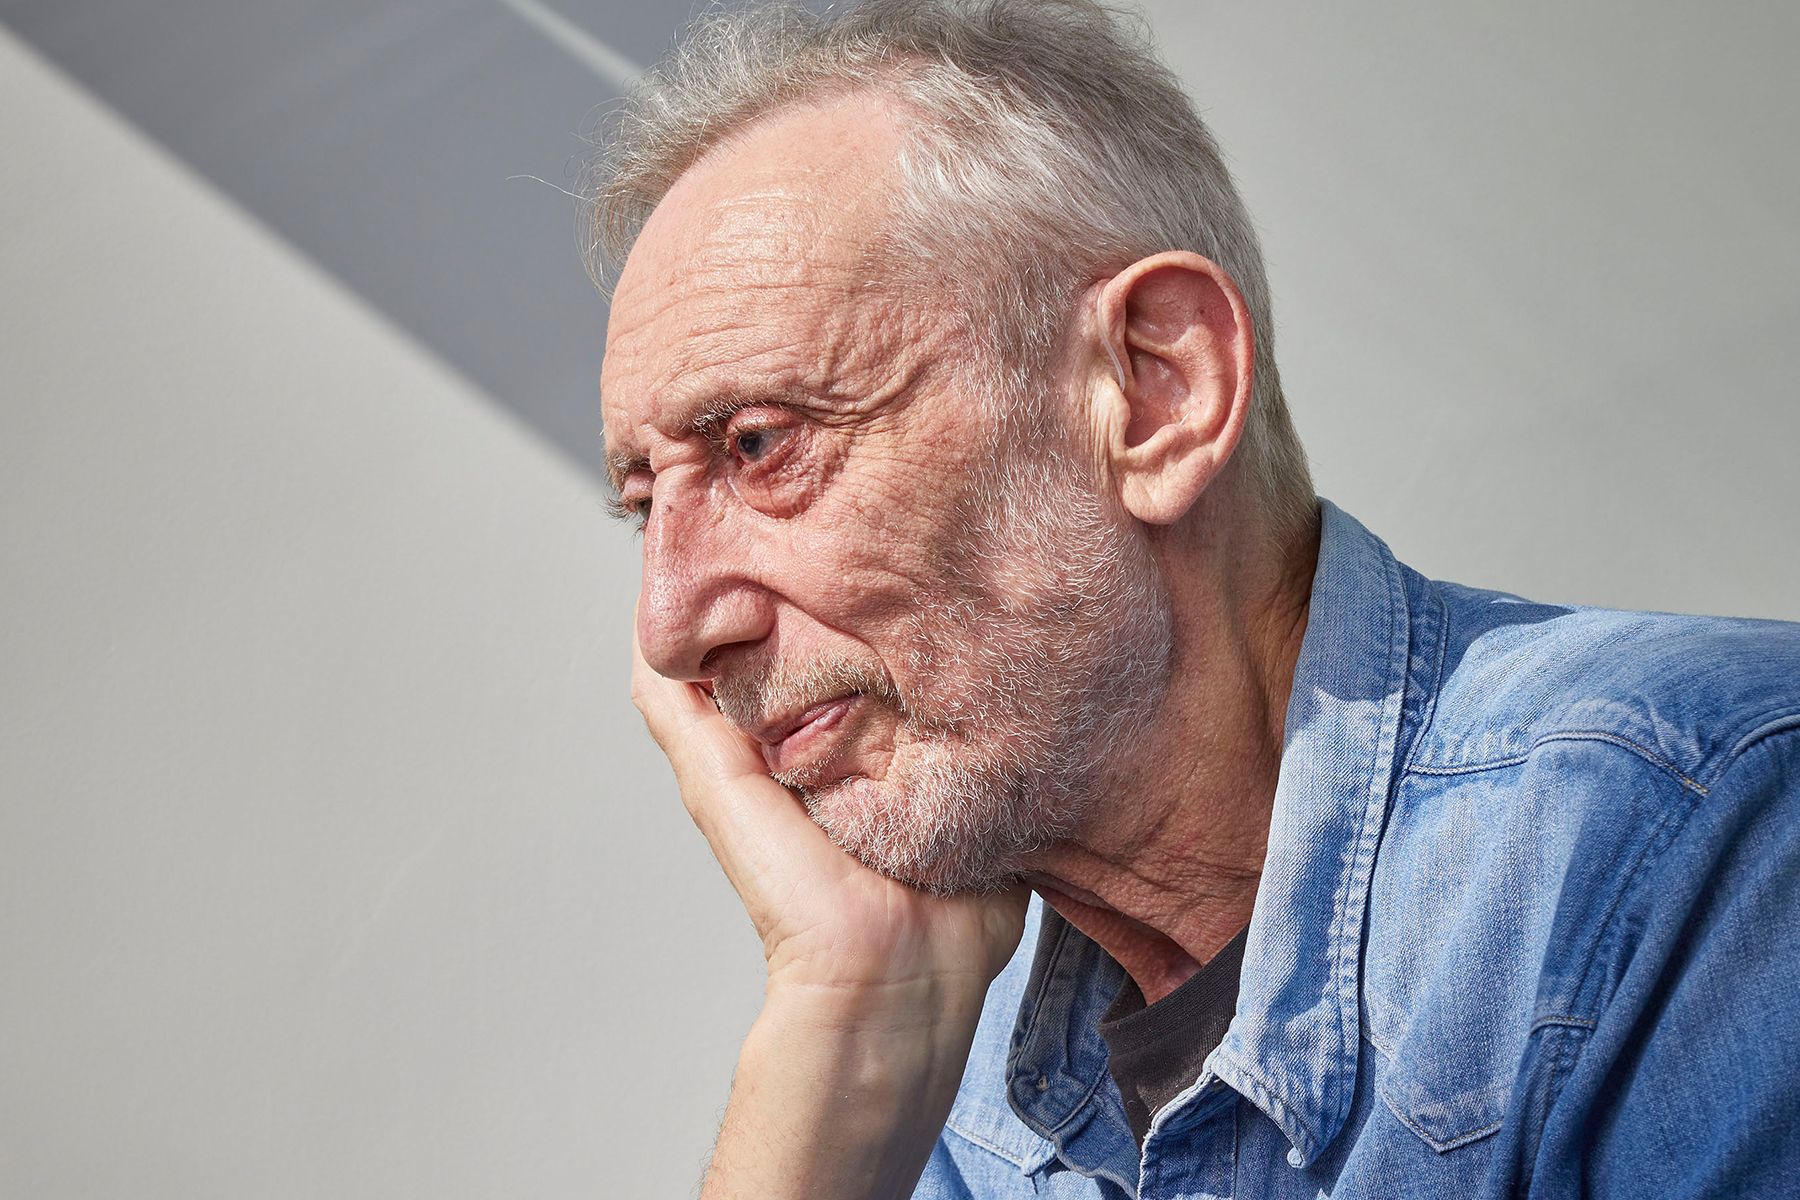 A photo of Michael Rosen in profile, against a grey background